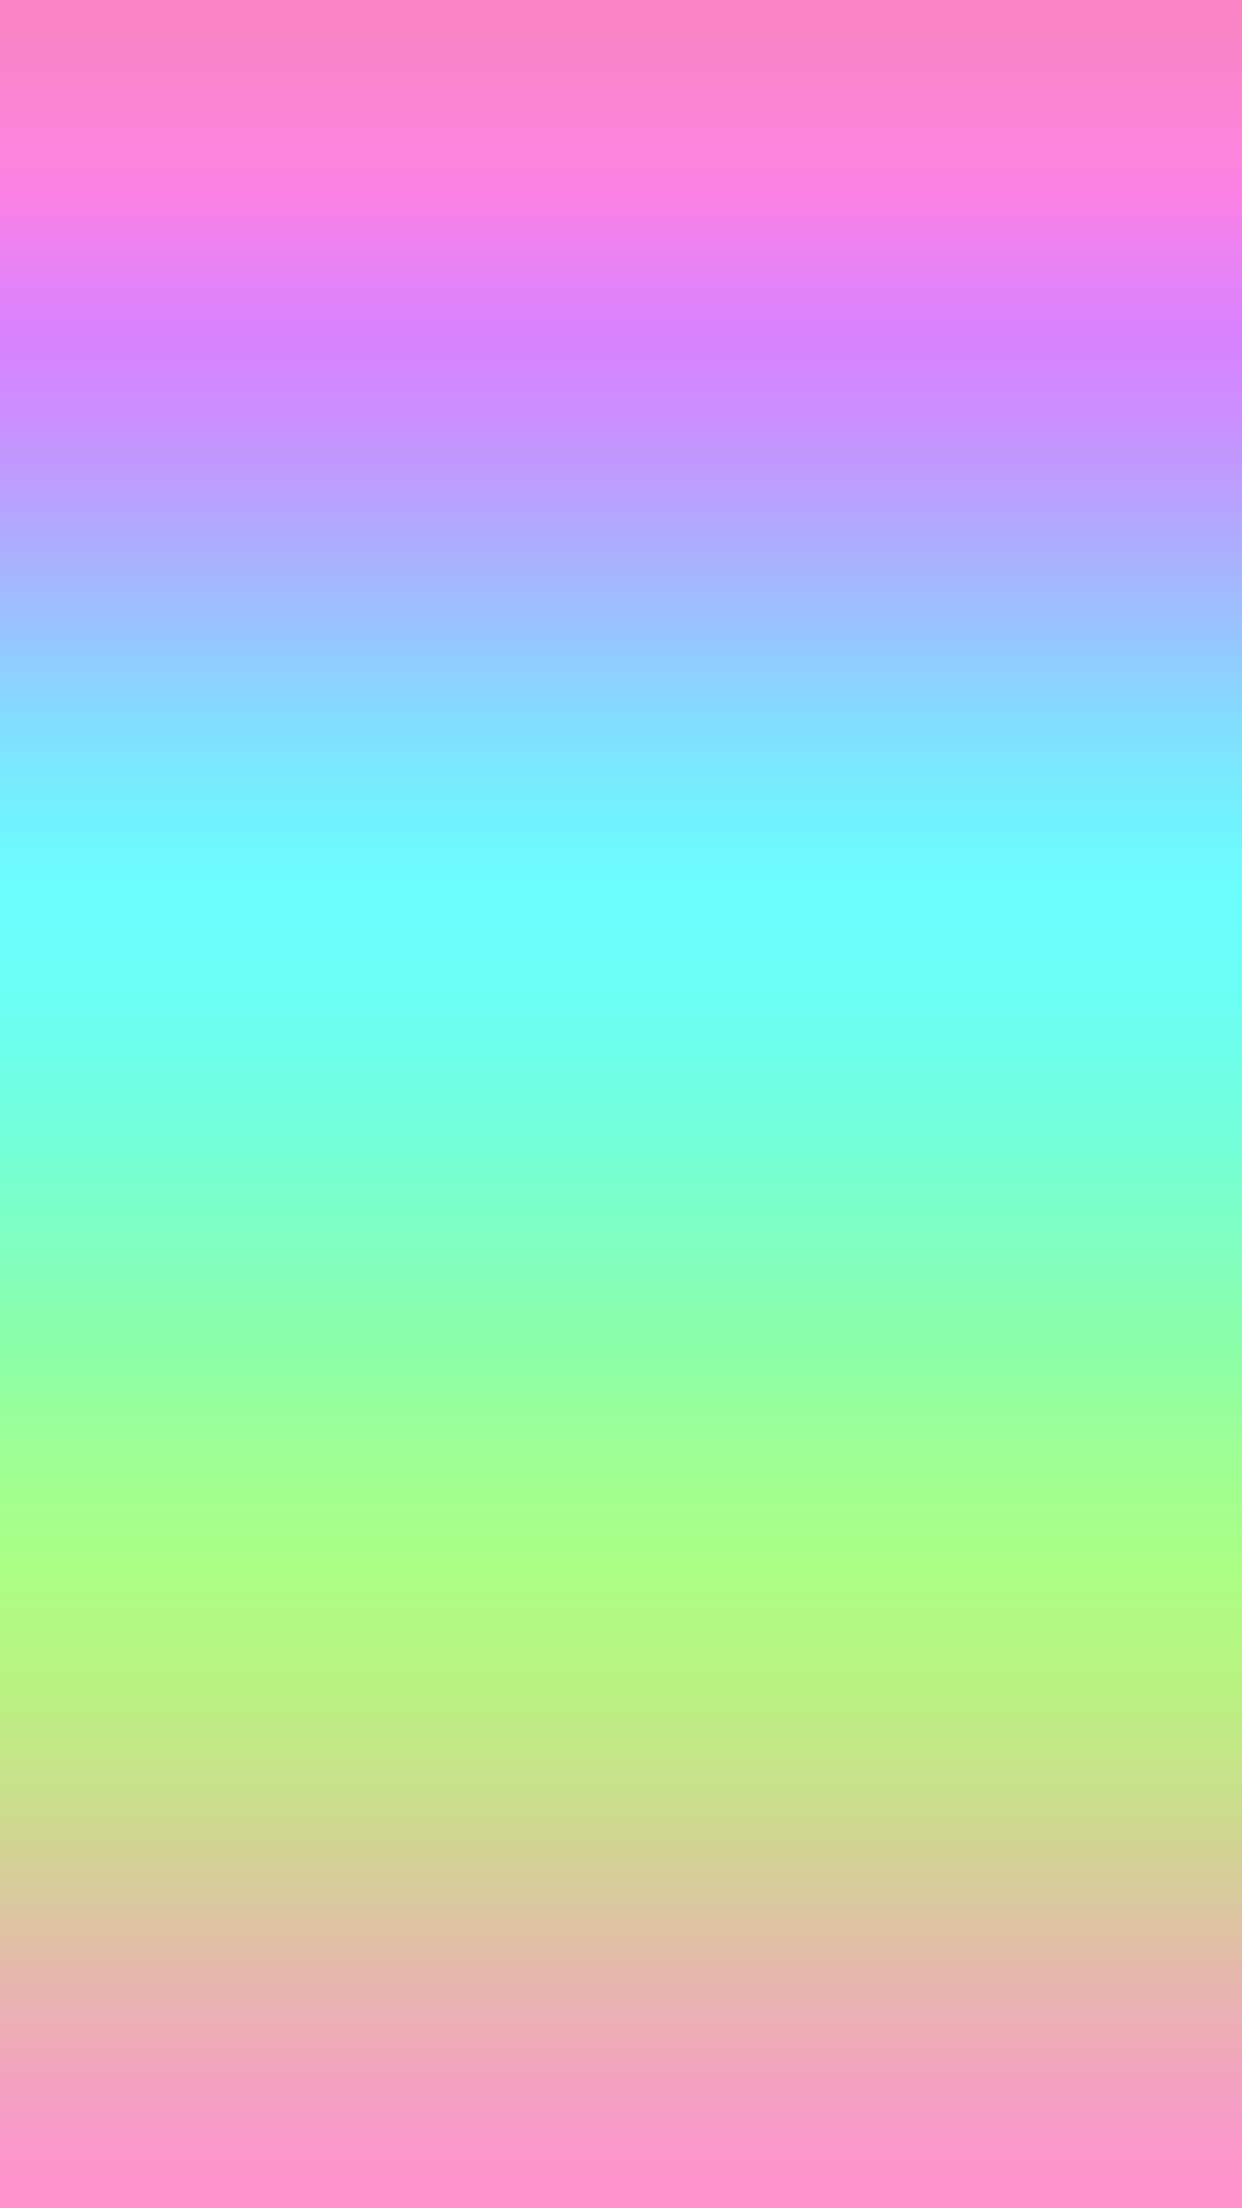 1242x2208 1899x3377 Download Wallpaper Green Ombre - blue-and-purple-ombre-wallpaper -polygon